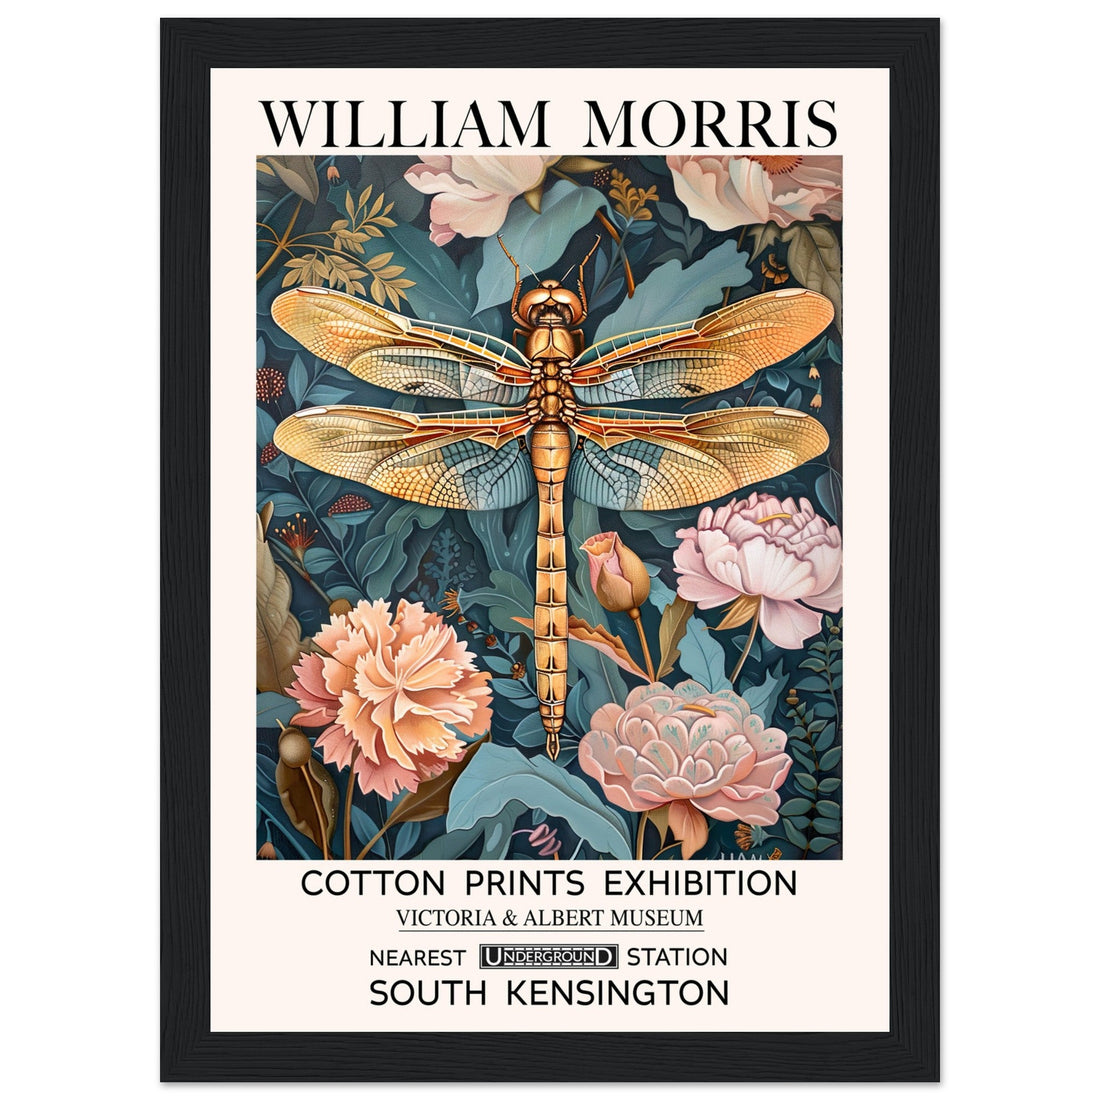 William Morris Framed Print - The Dragonfly, Floral Background, Framed Art print, Teal, #illieeart